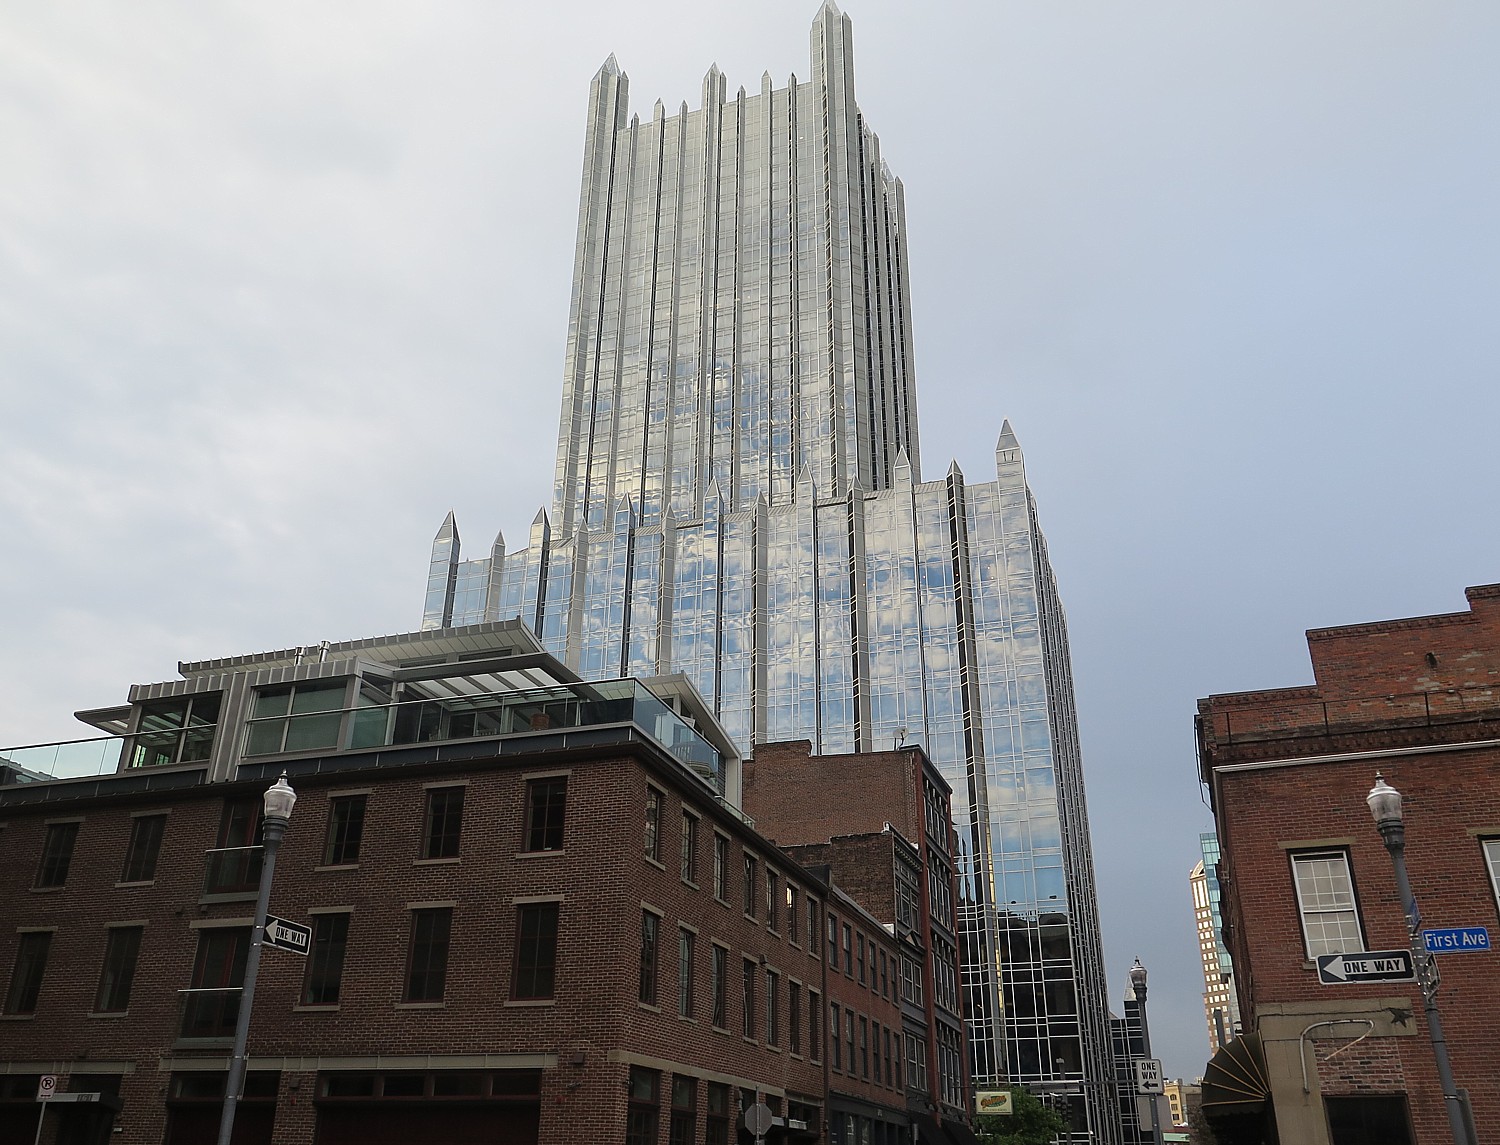 Old juxtaposed with new in Pittsburgh’s downtown © 2016 Karen Rubin/goingplacesfarandnear.com